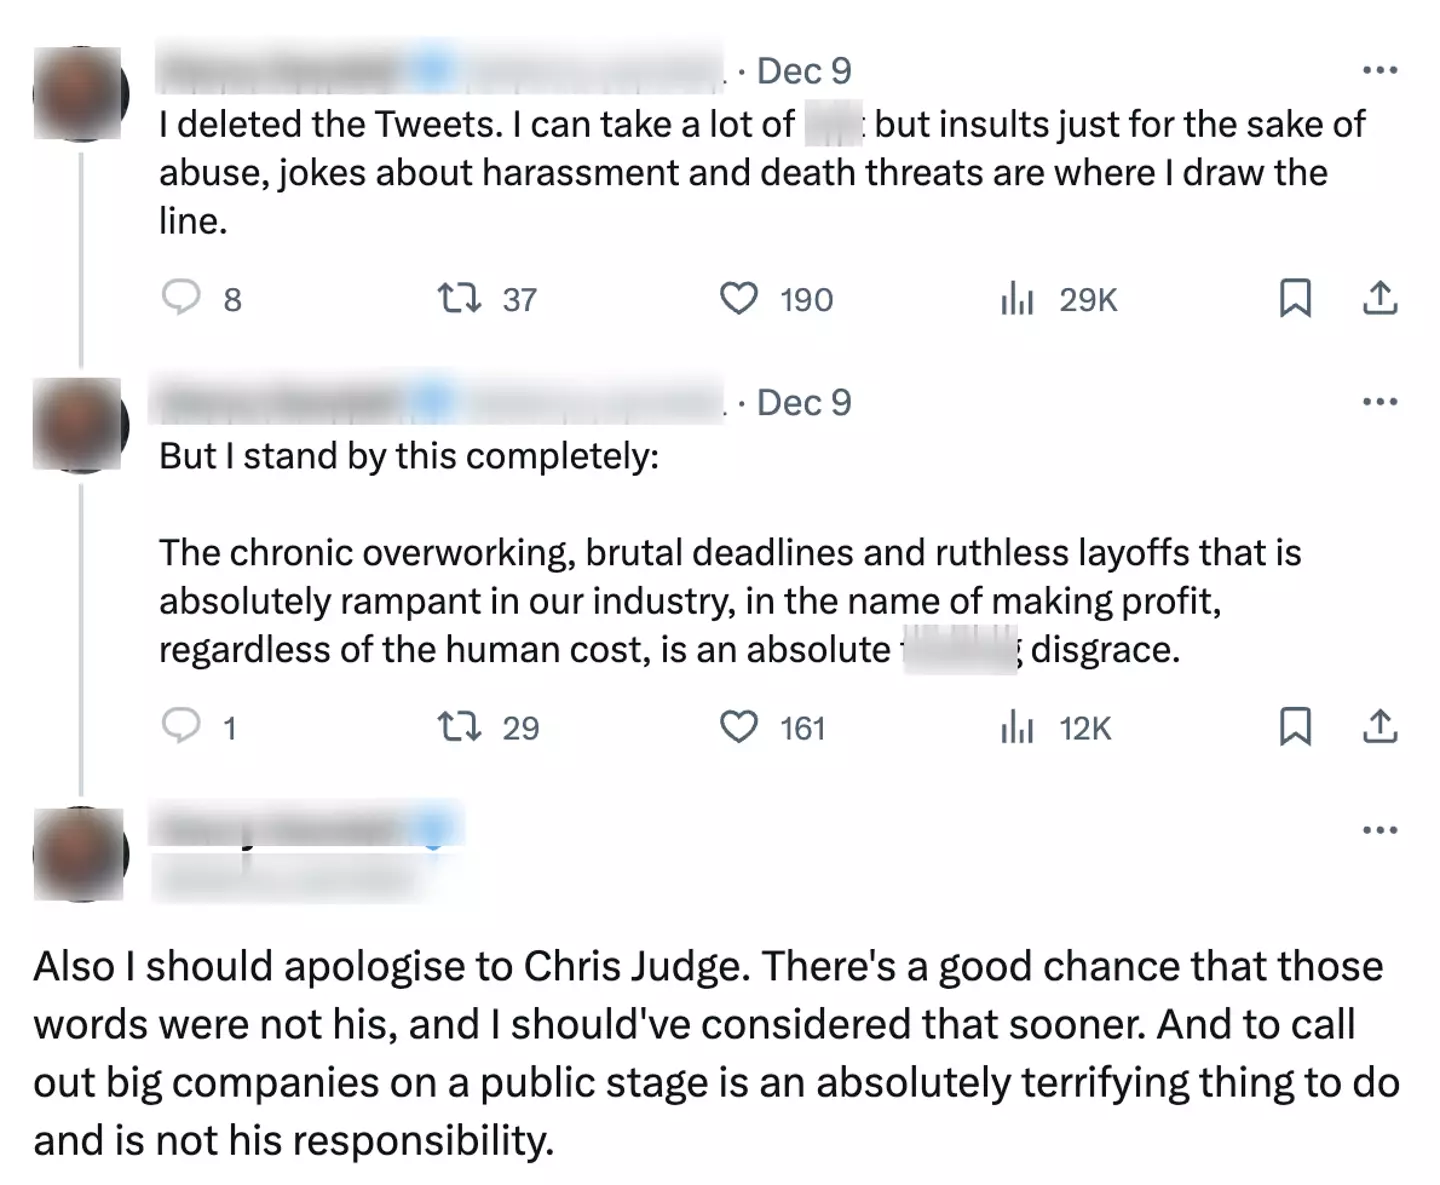 One person has since apologized to Christopher Judge.